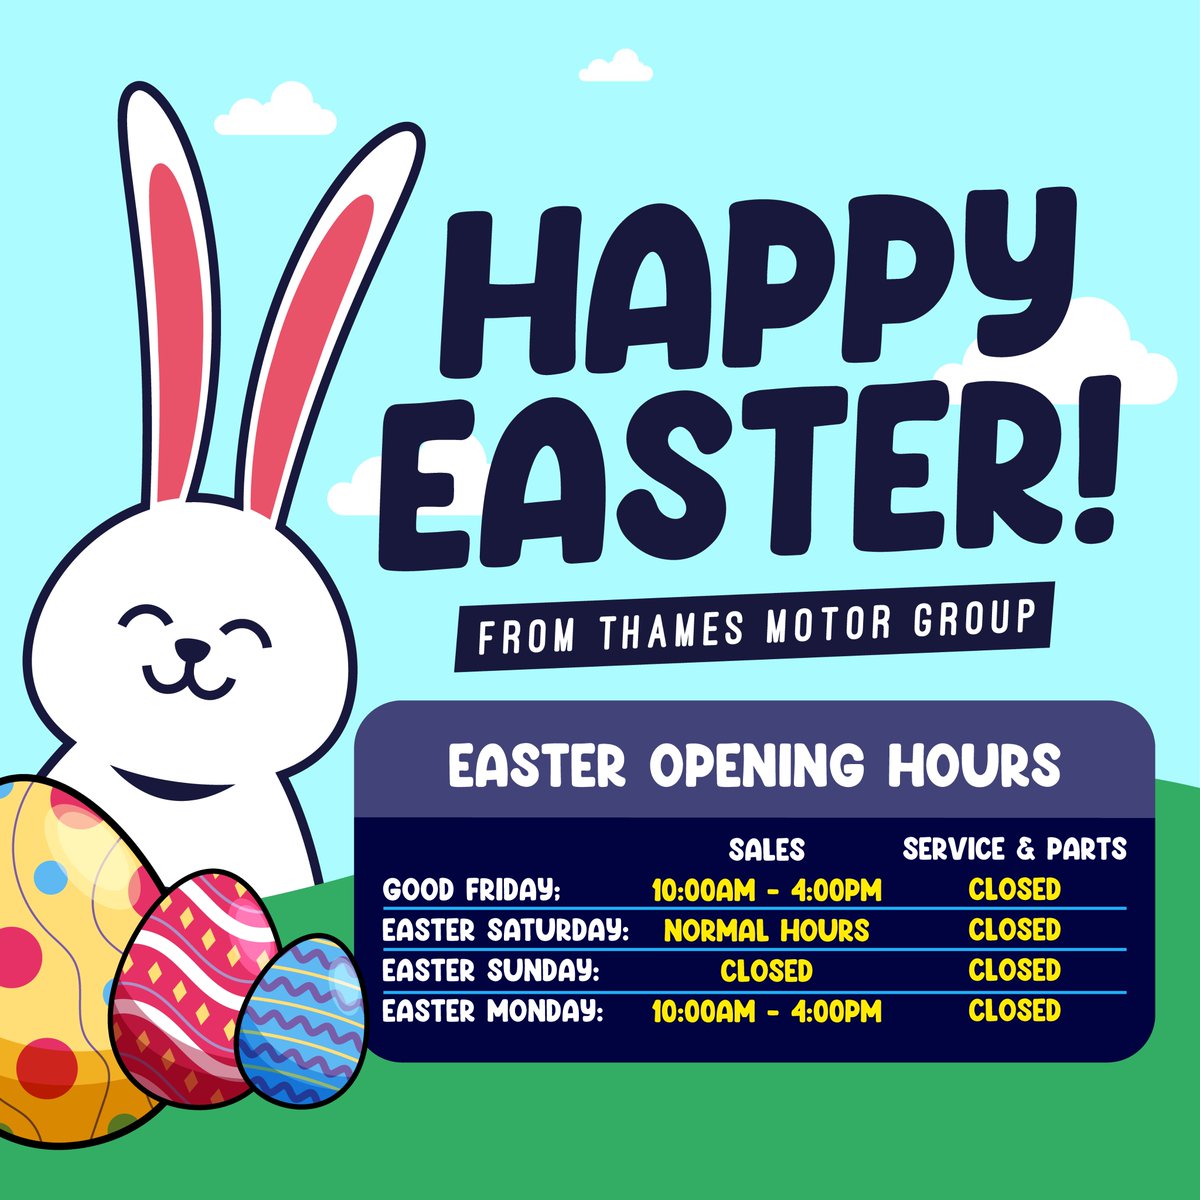 Happy Easter from all of us at Thames Motor Group! 🐣🐰

Don’t miss our bank holiday opening hours.

#OpeningHours #Easter